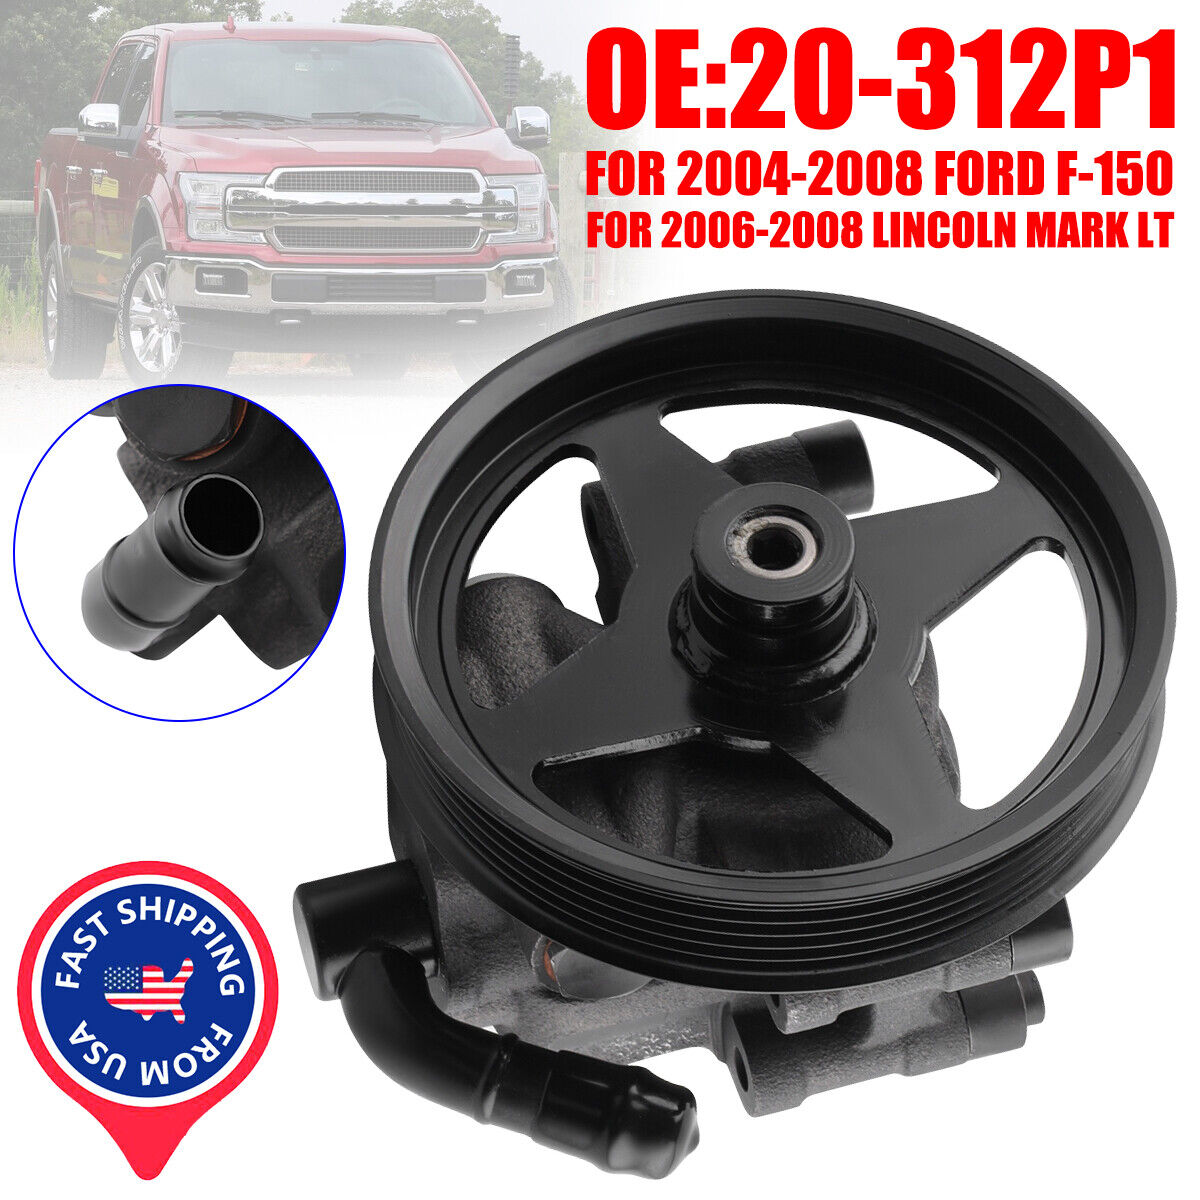 Power Steering Pump + Pulley for Lincoln Mark LT 2006-2008 Ford F-150 2004-2008